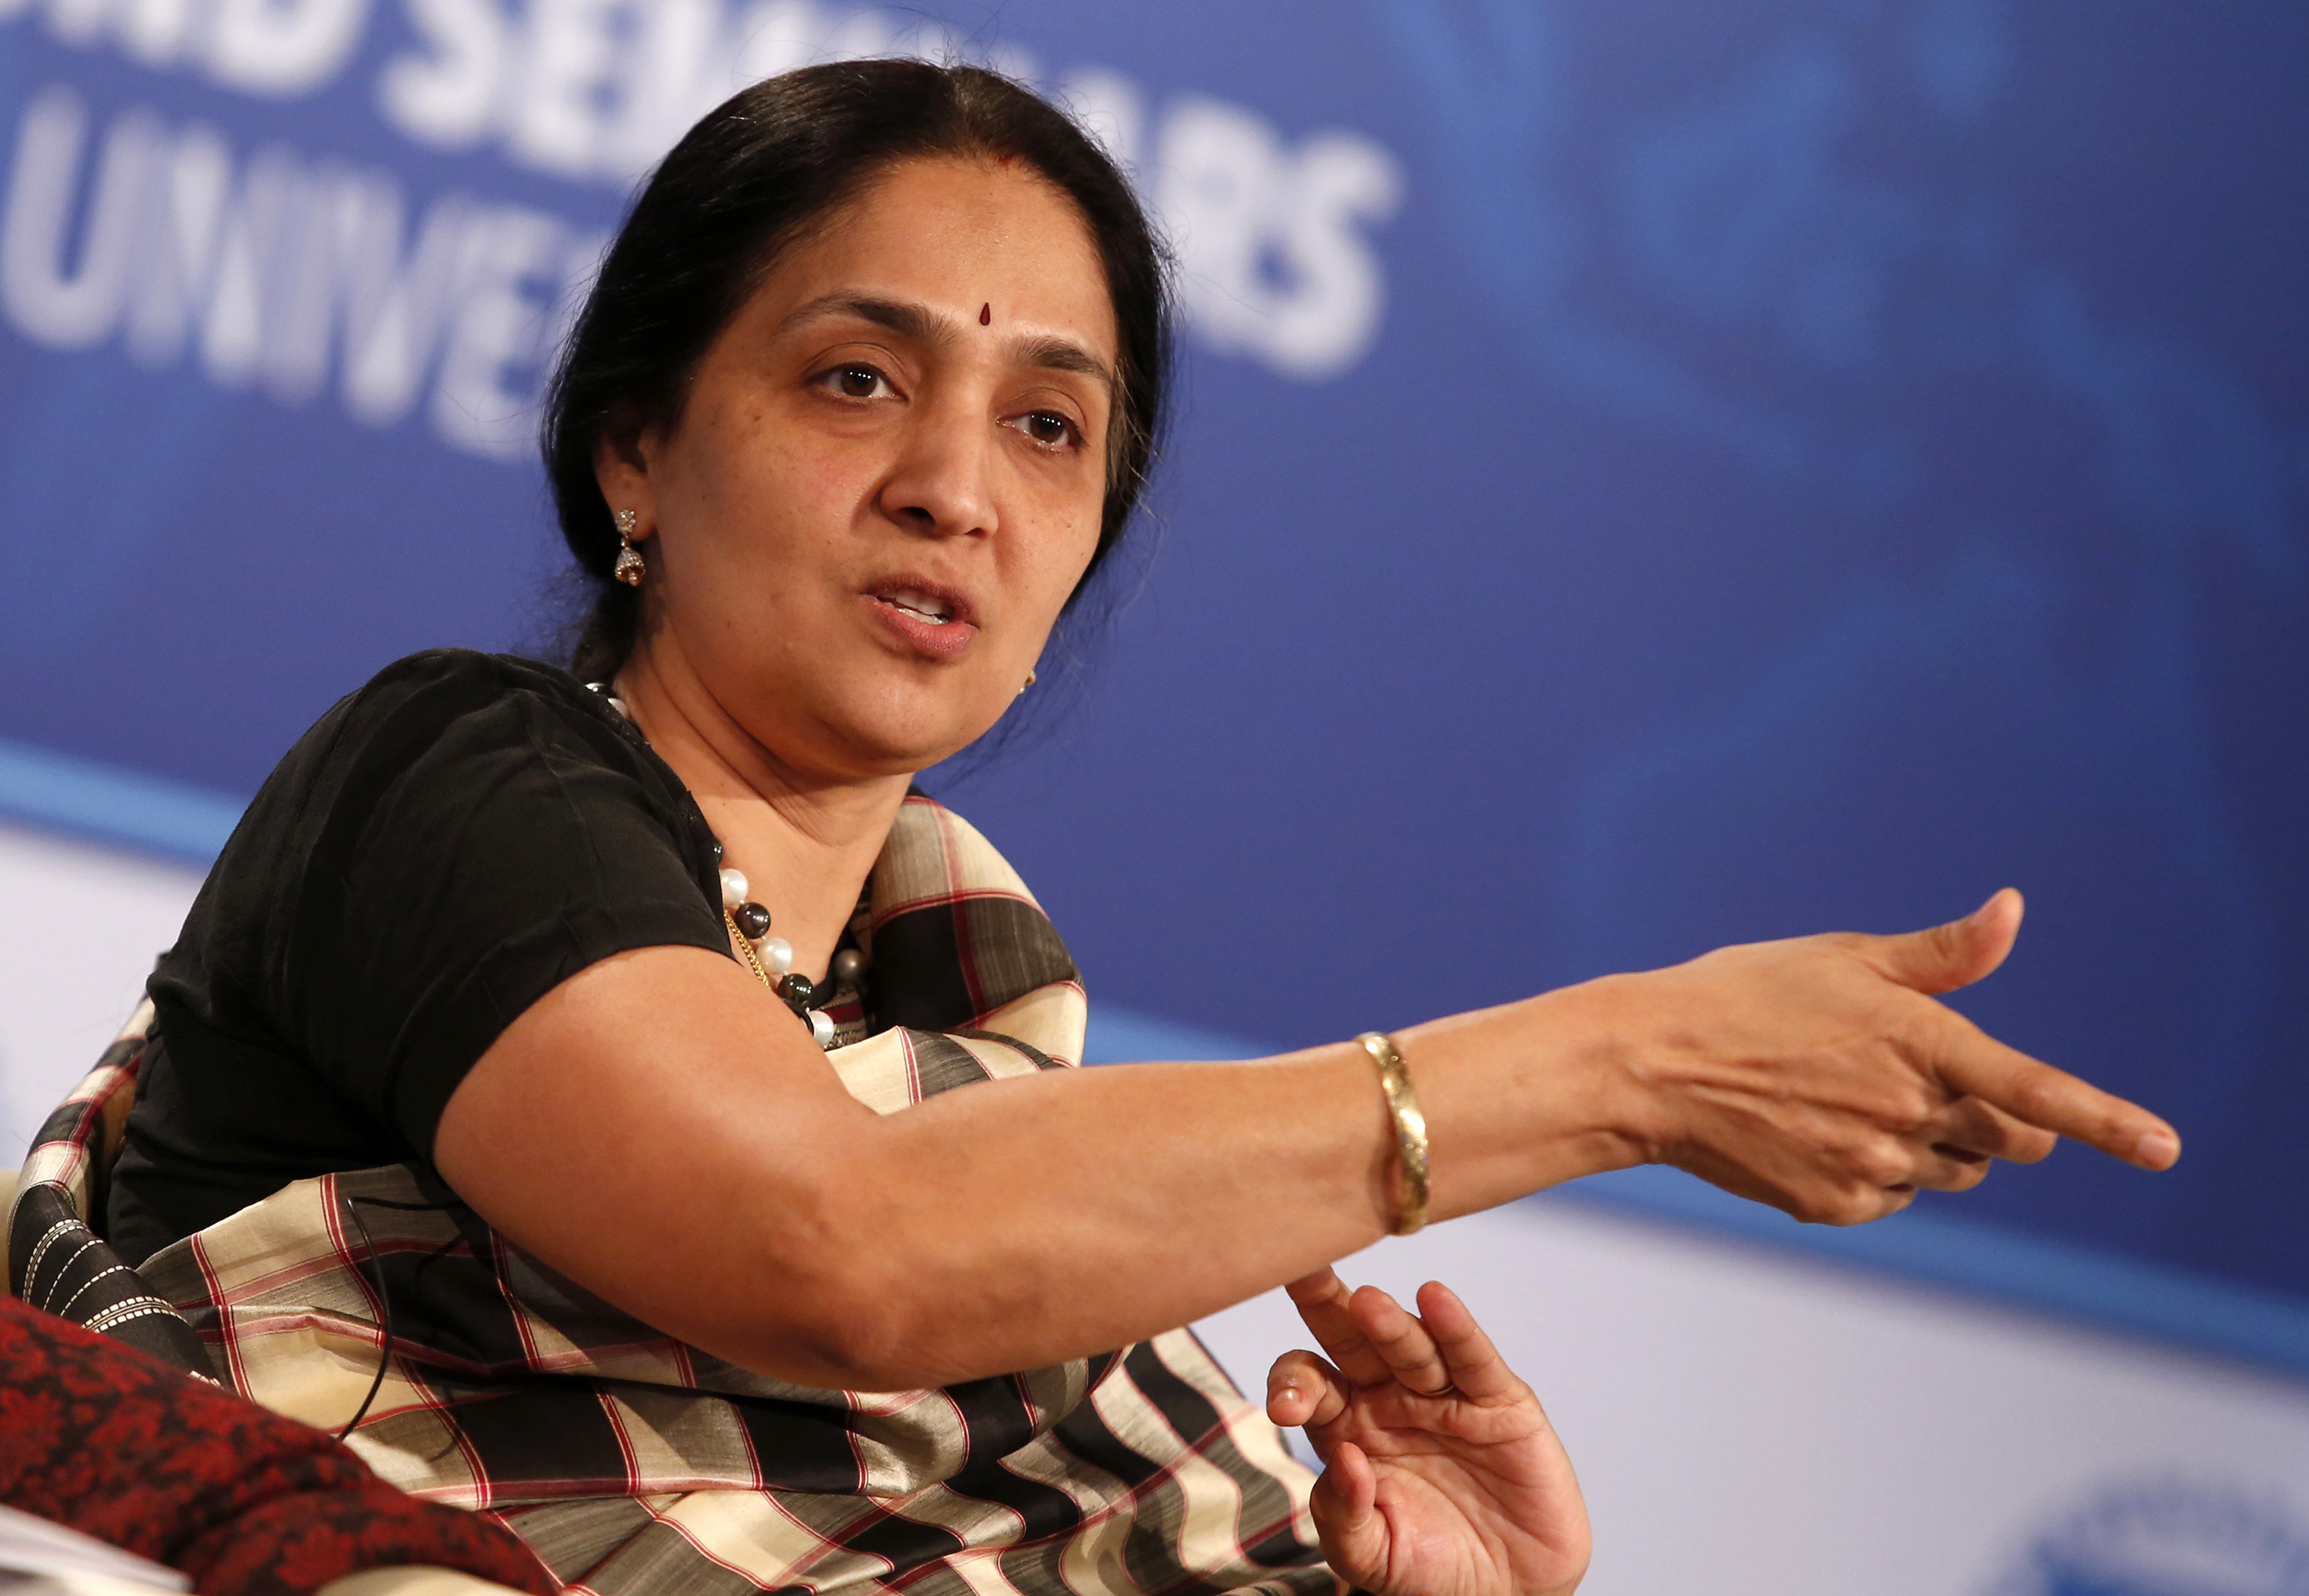 Chitra Ramkrishna, Managing Director and CEO, National Stock Exchange (India), participates in The Future of Finance panel discussion during the IMF-World Bank annual meetings in Washington